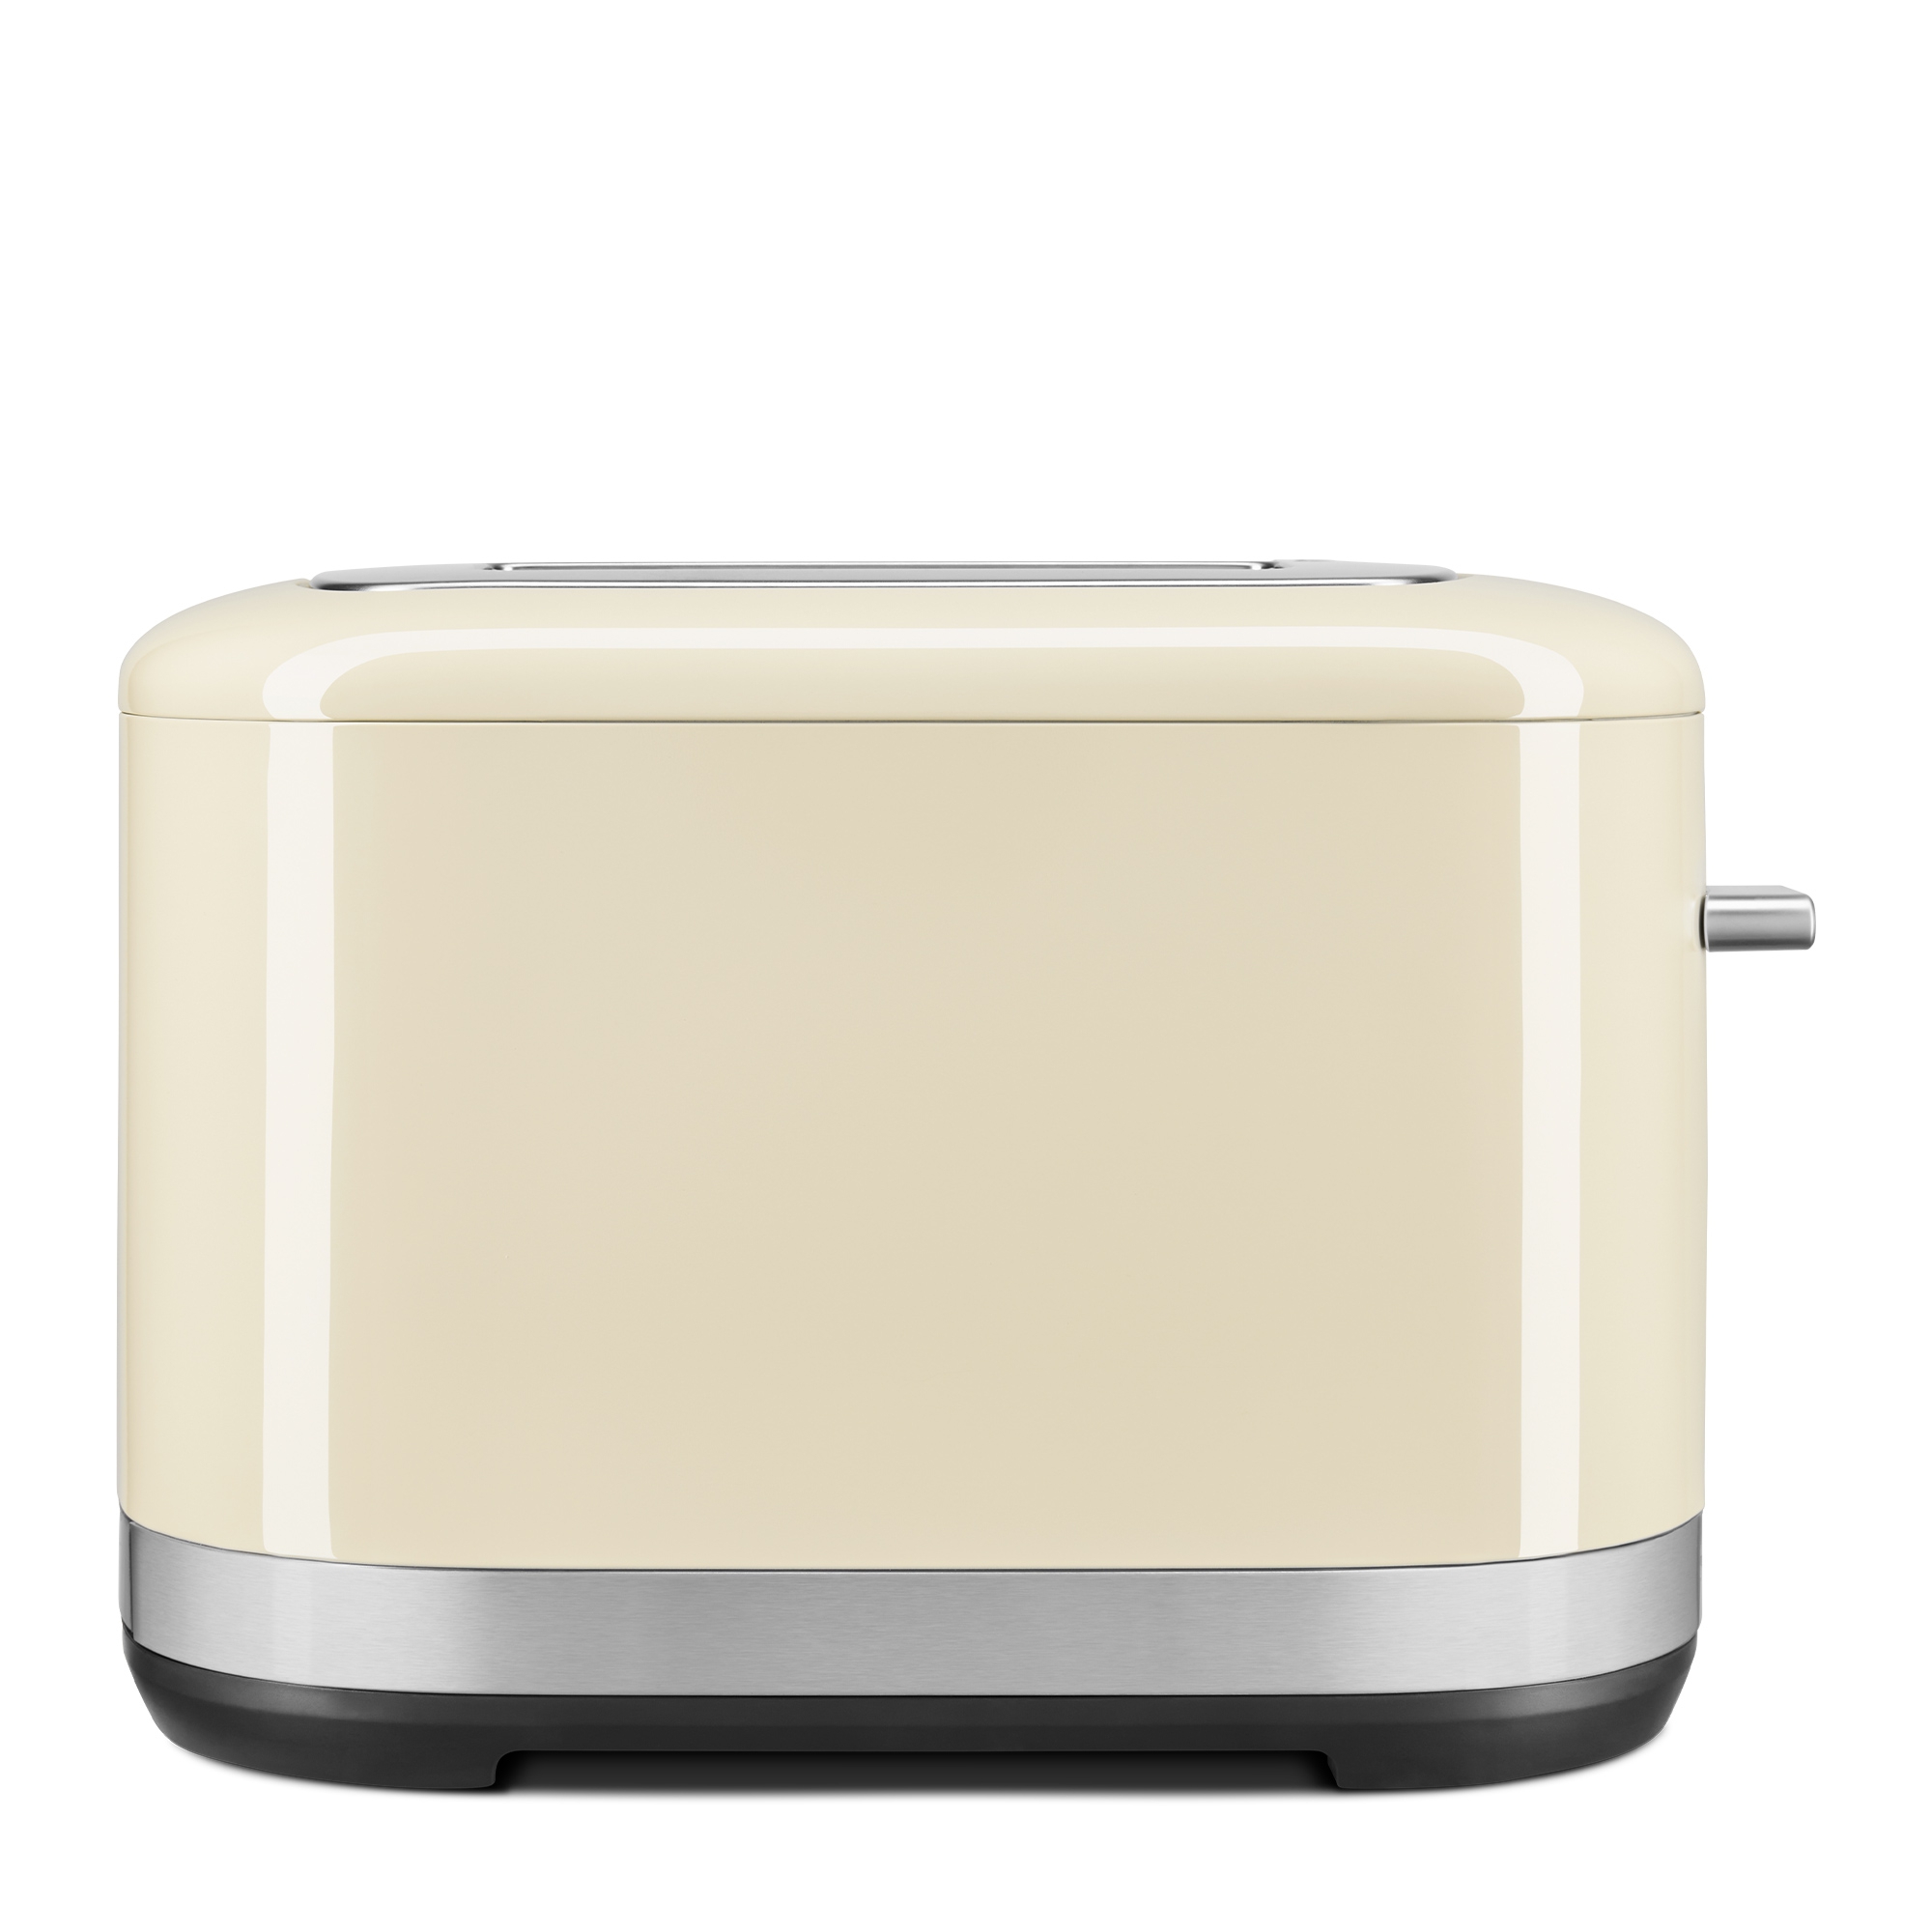 KitchenAid - Toaster with manual operation for 2 slices - Creme